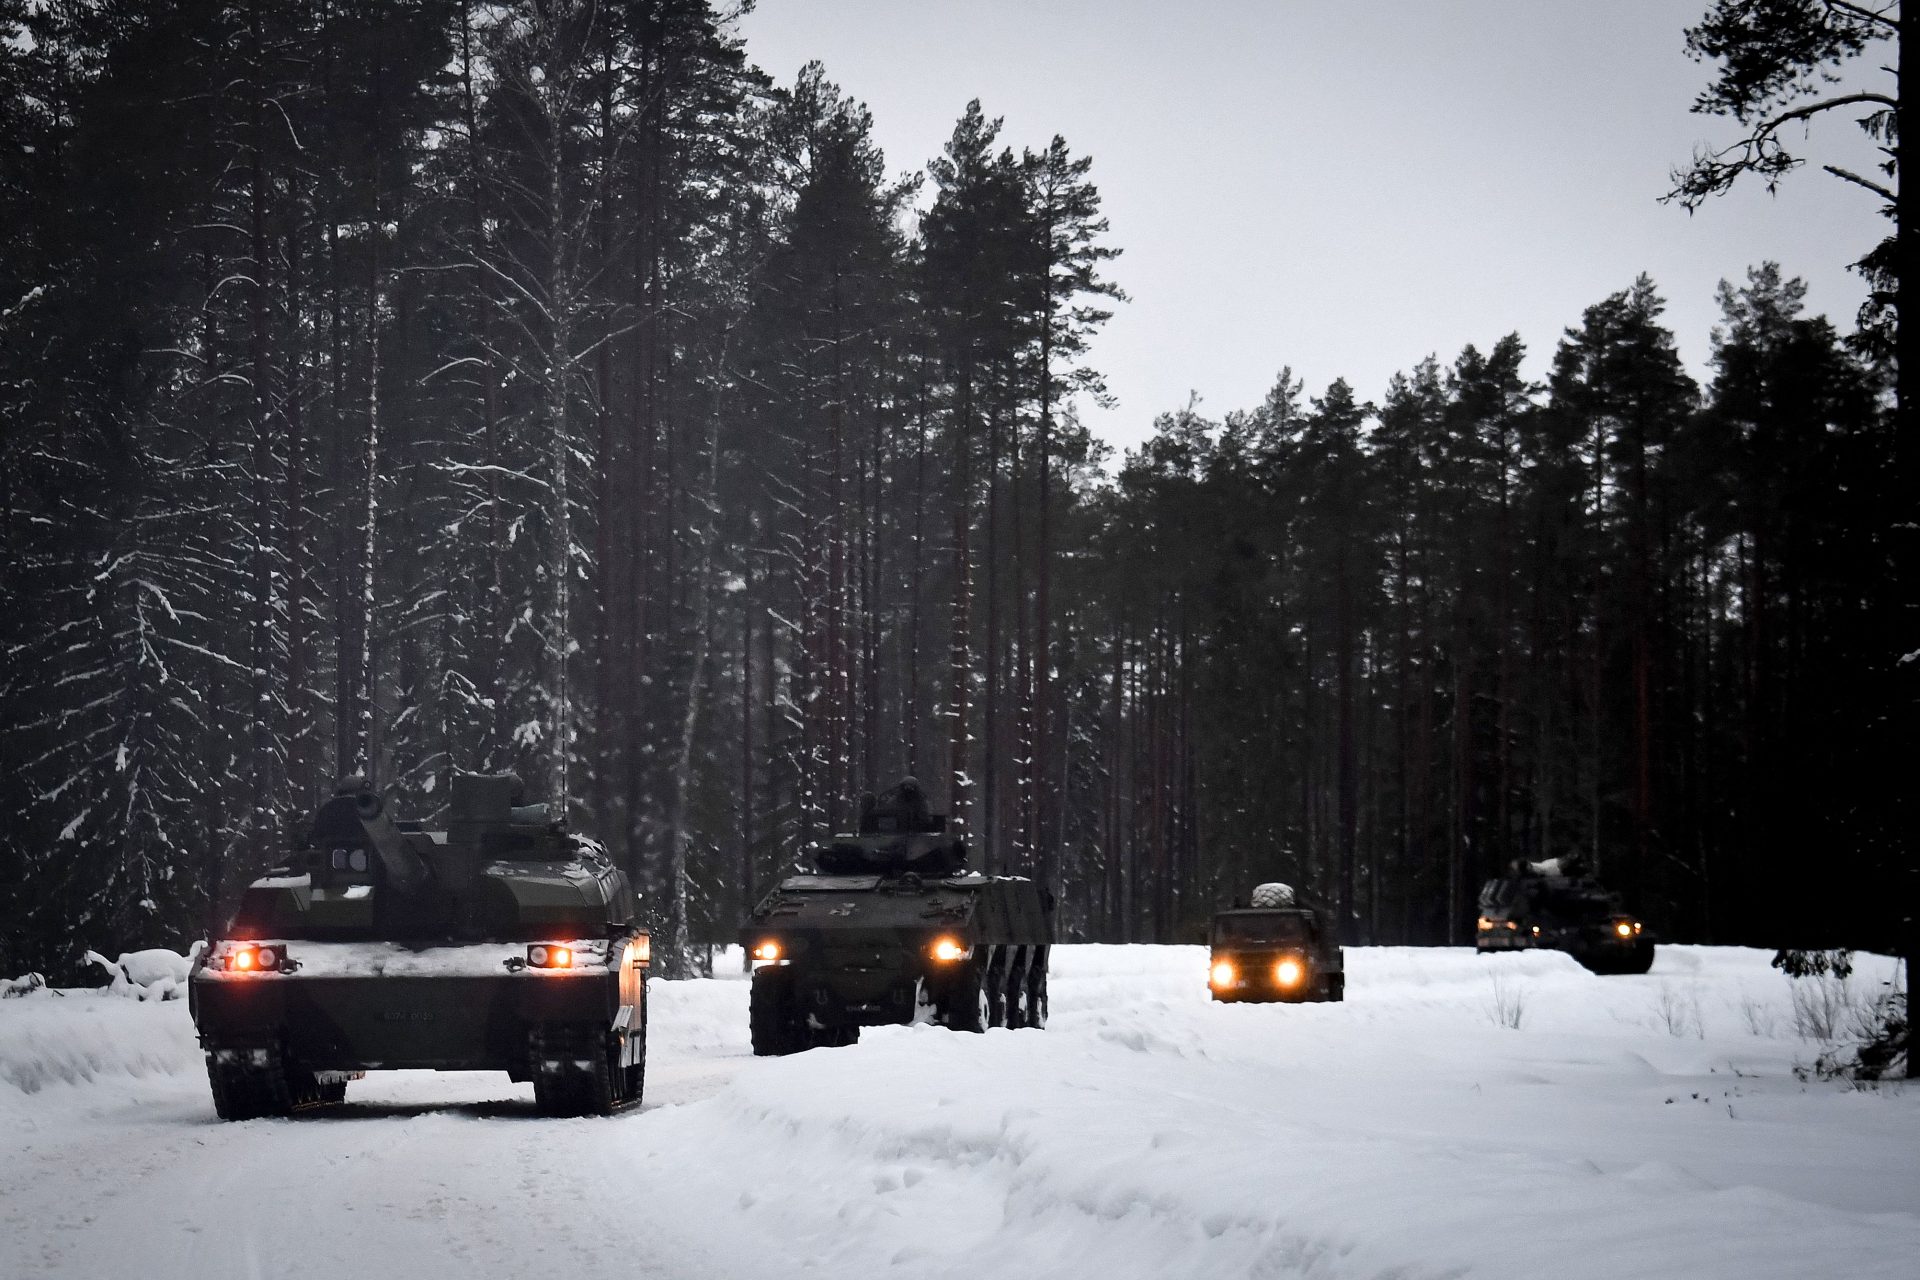 Does Russia pose a serious threat to the Baltics?